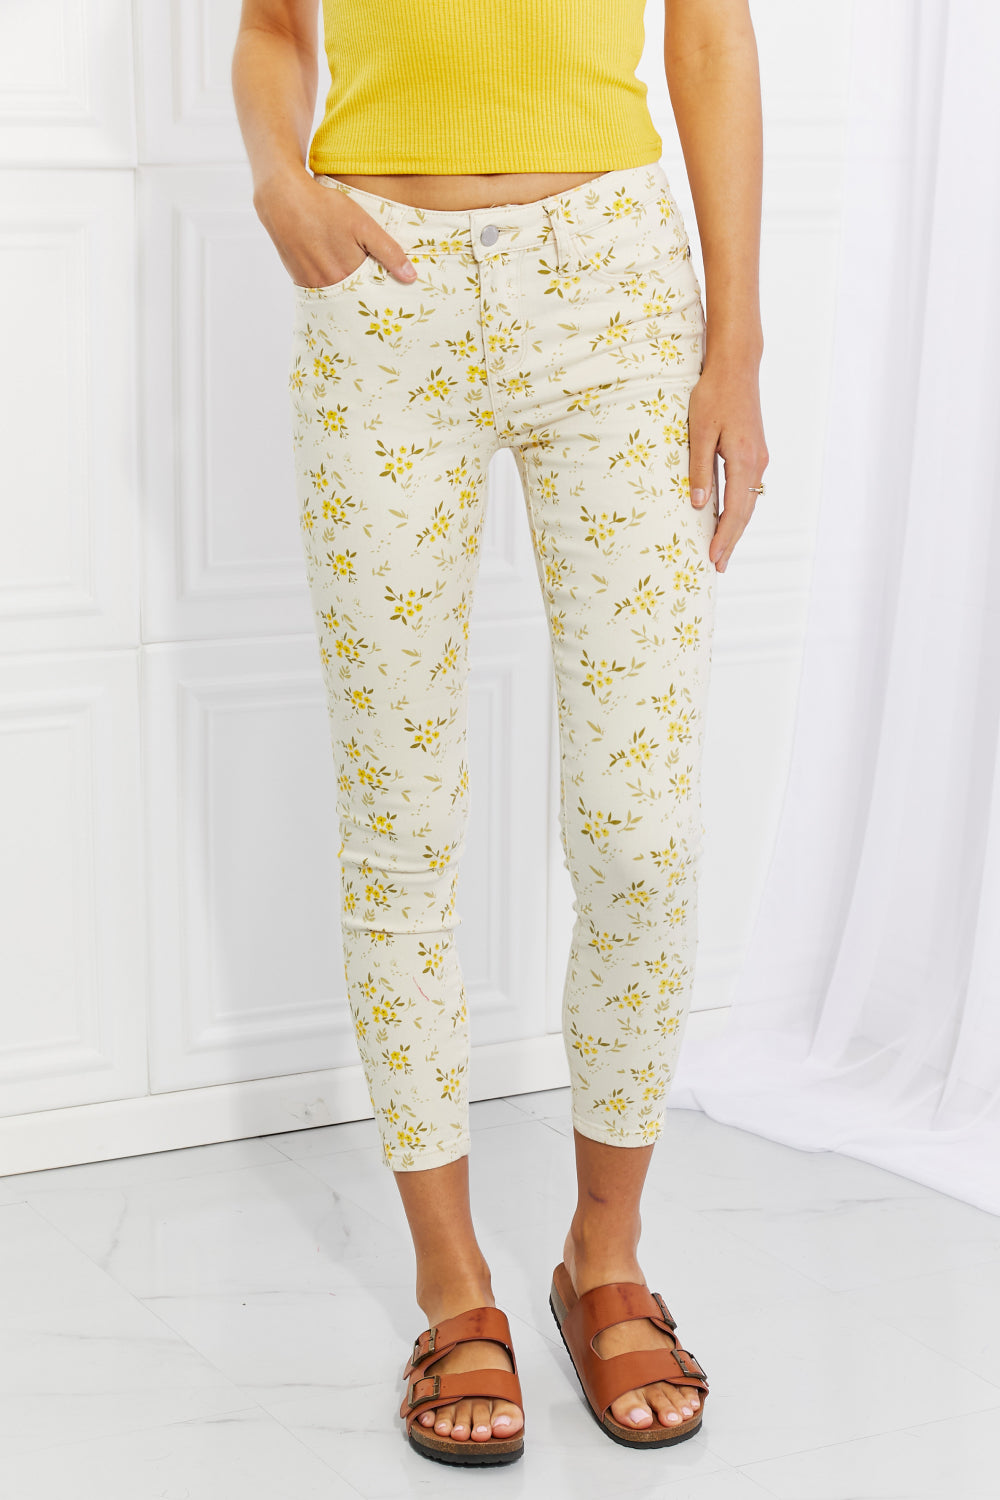 Judy Blue Golden Meadow Floral Skinny Jeans